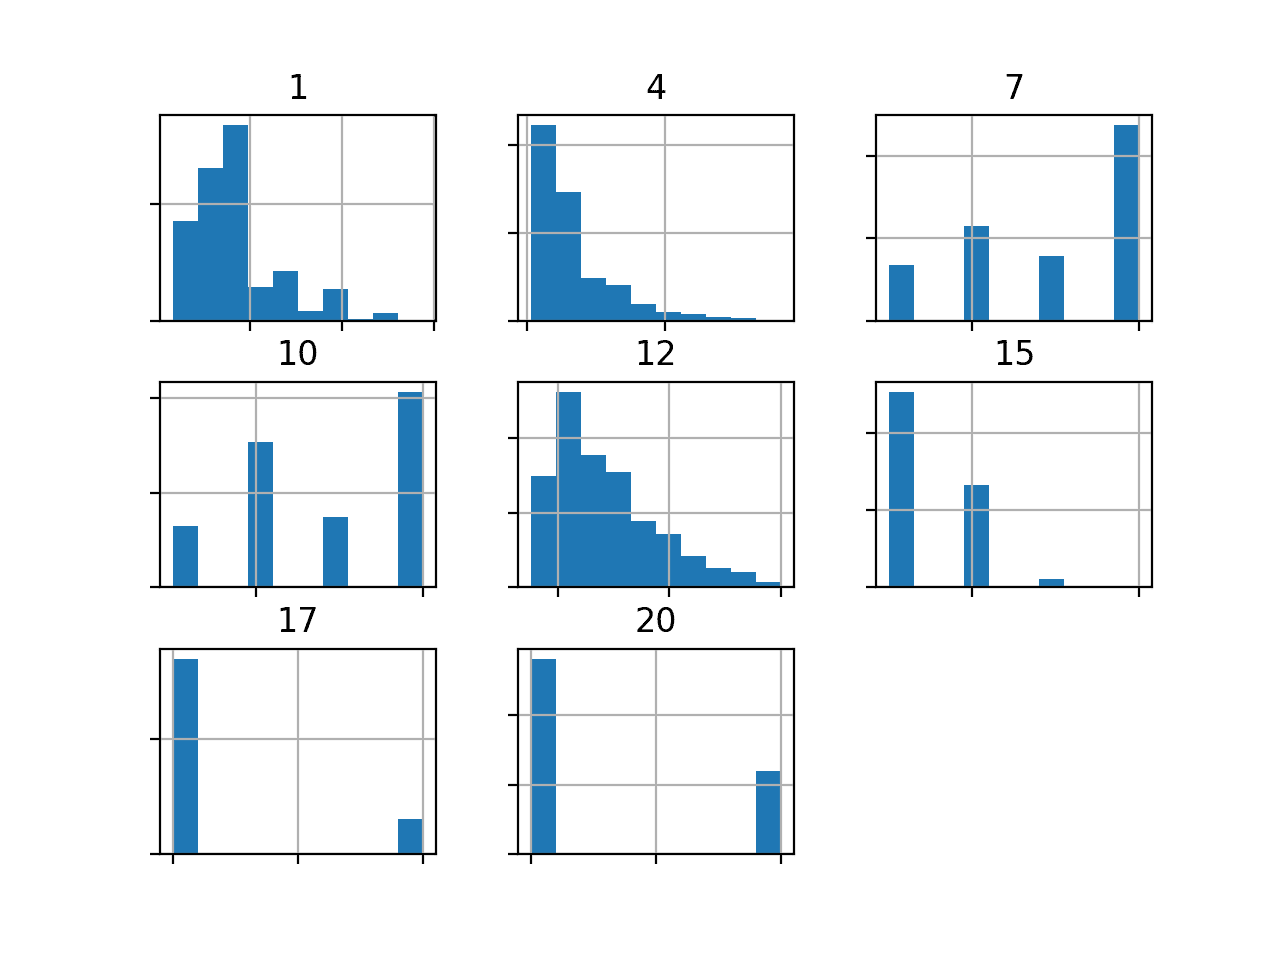 Histogram of Numeric Variables in the German Credit Dataset